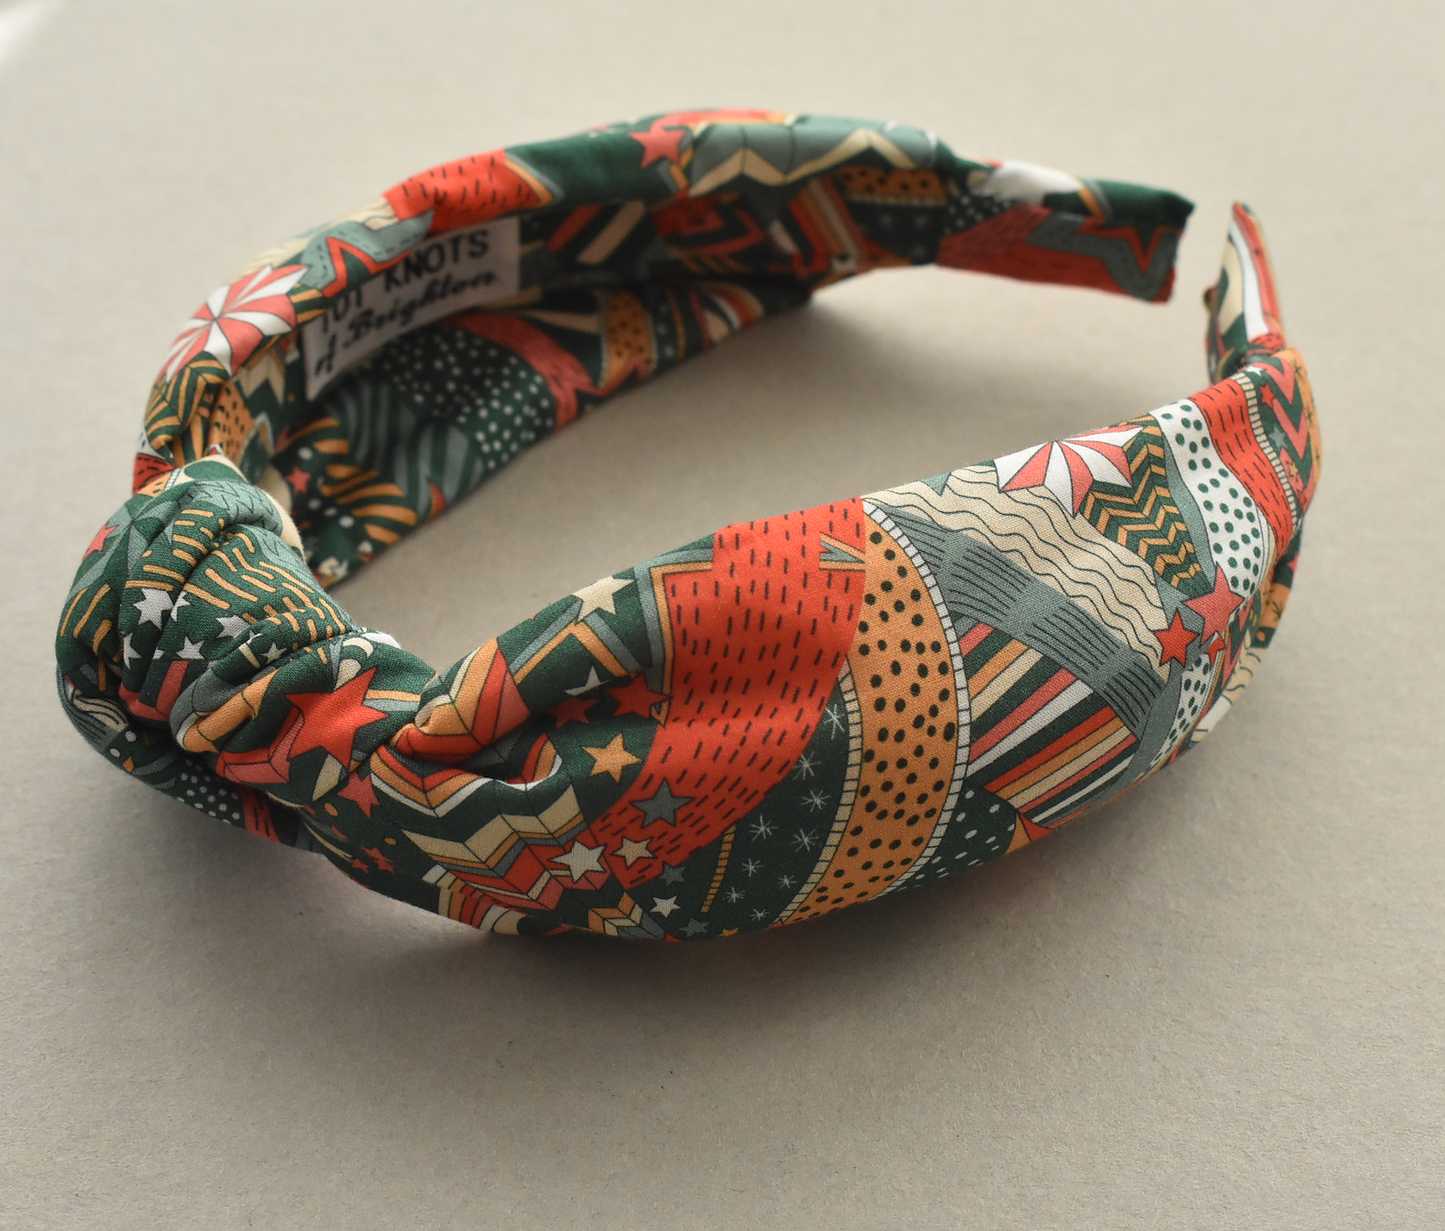 Ladies Knot Alice band - My Little Star Liberty of London Christmas print